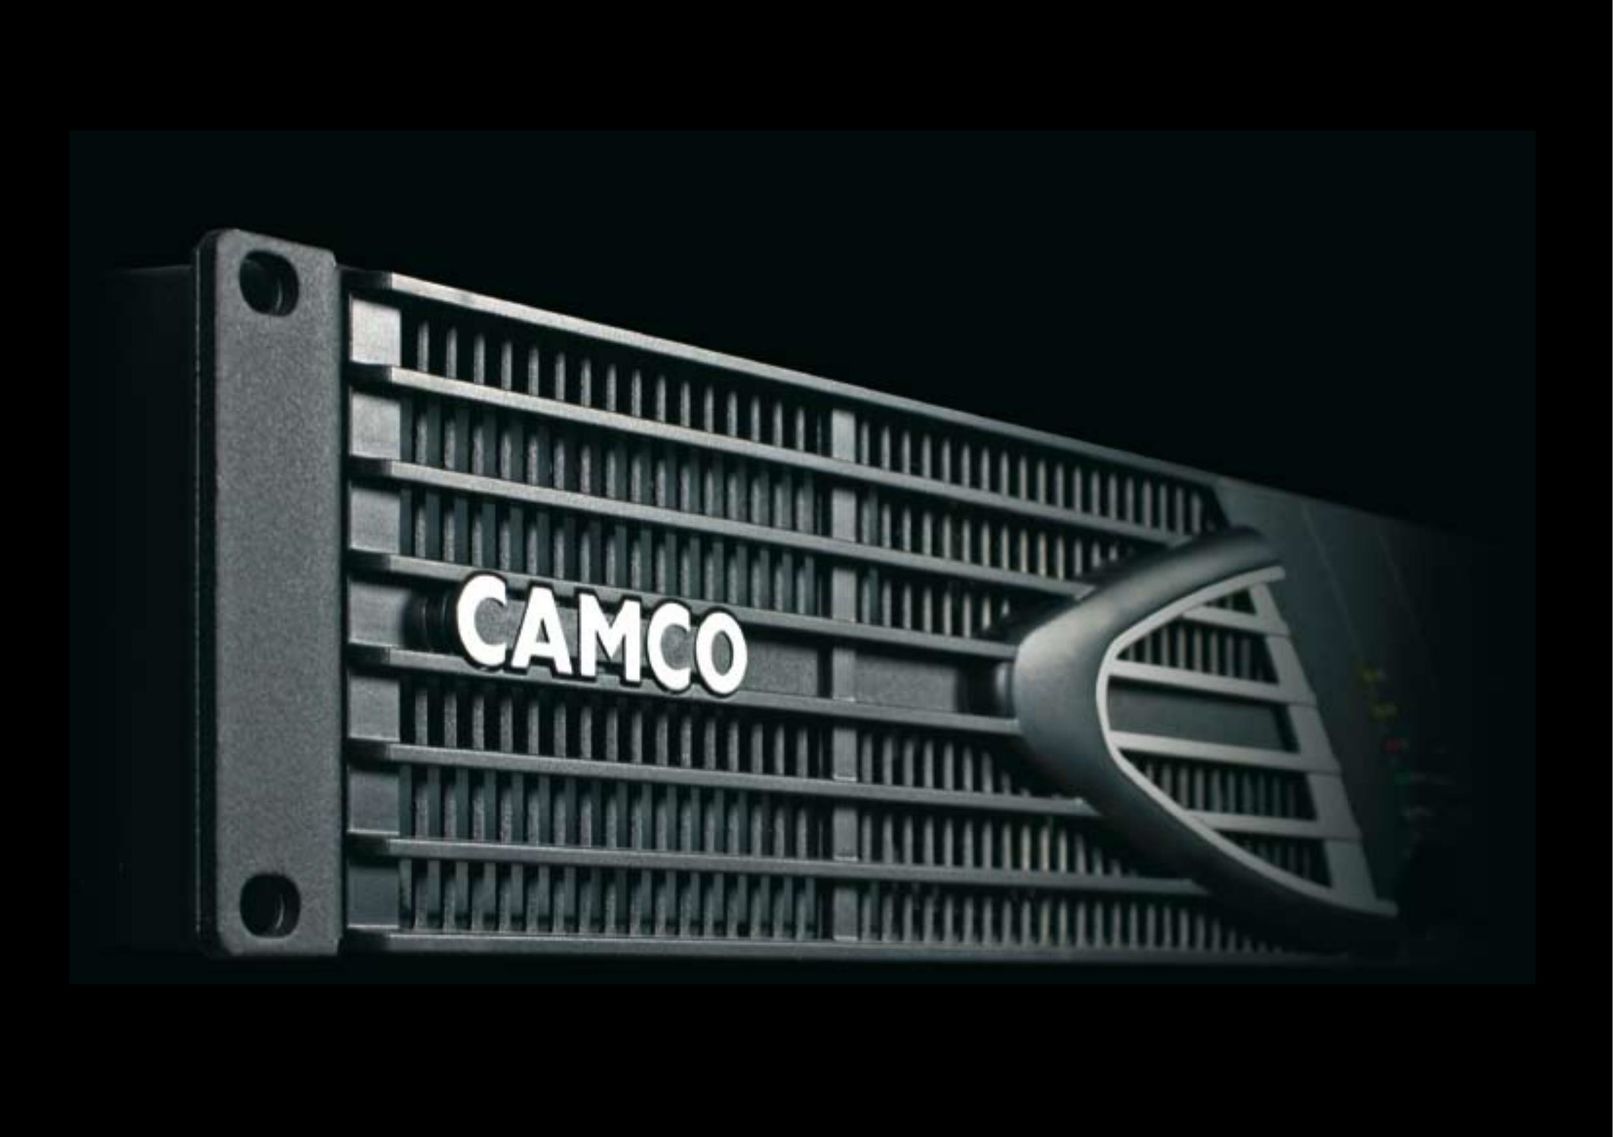 Camco P.4 Series Stereo Amplifier User Manual